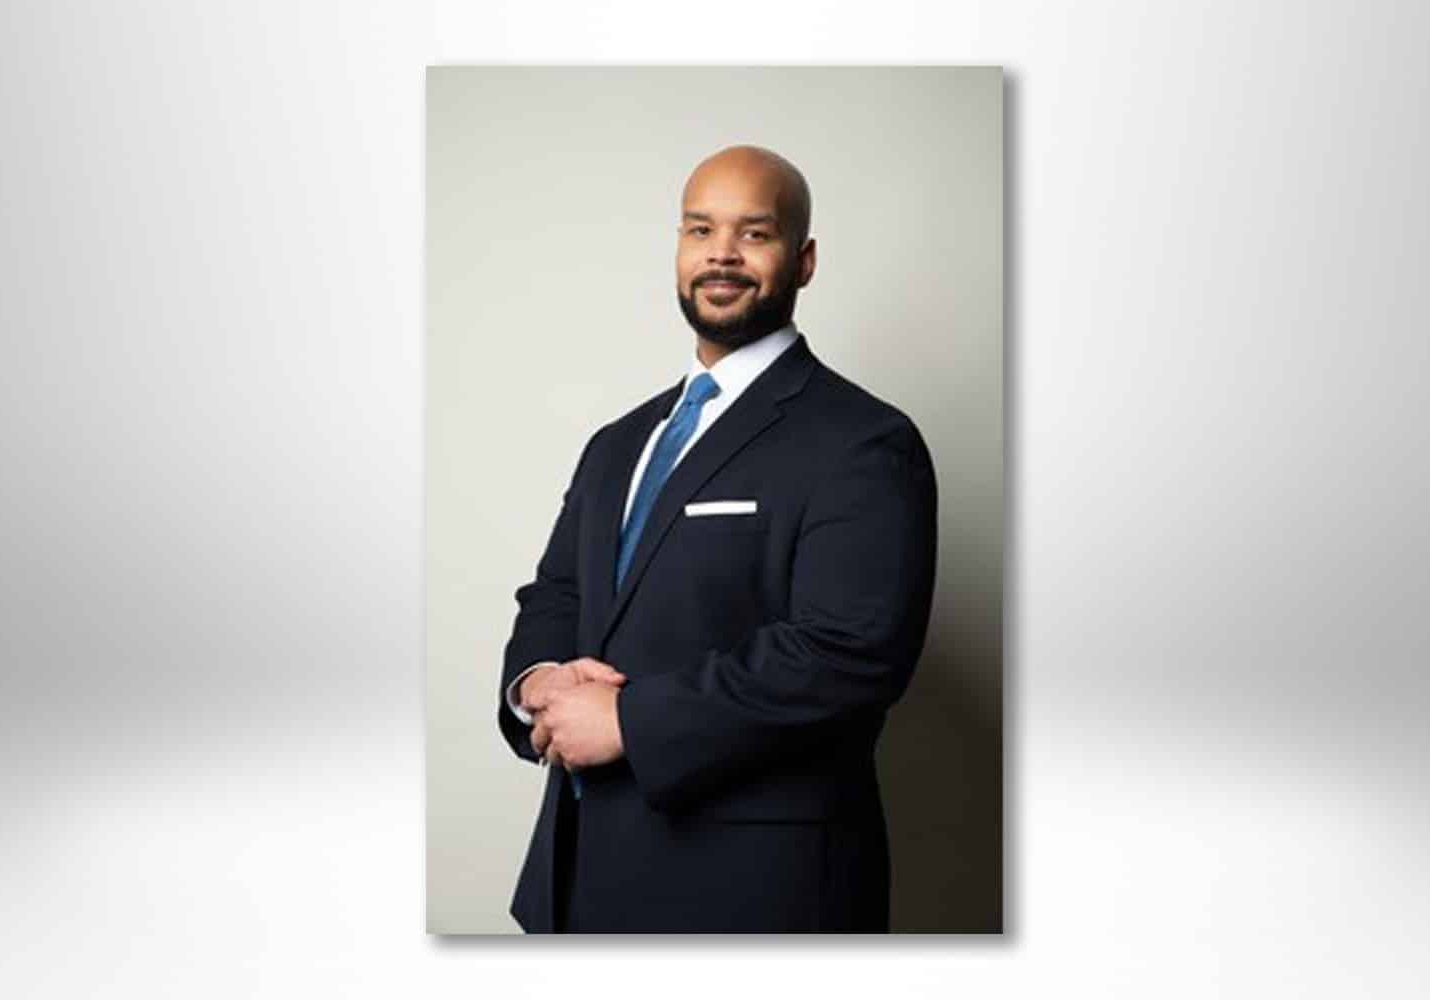 Vaughn Named Among Top 40 Black Lawyers Under 40